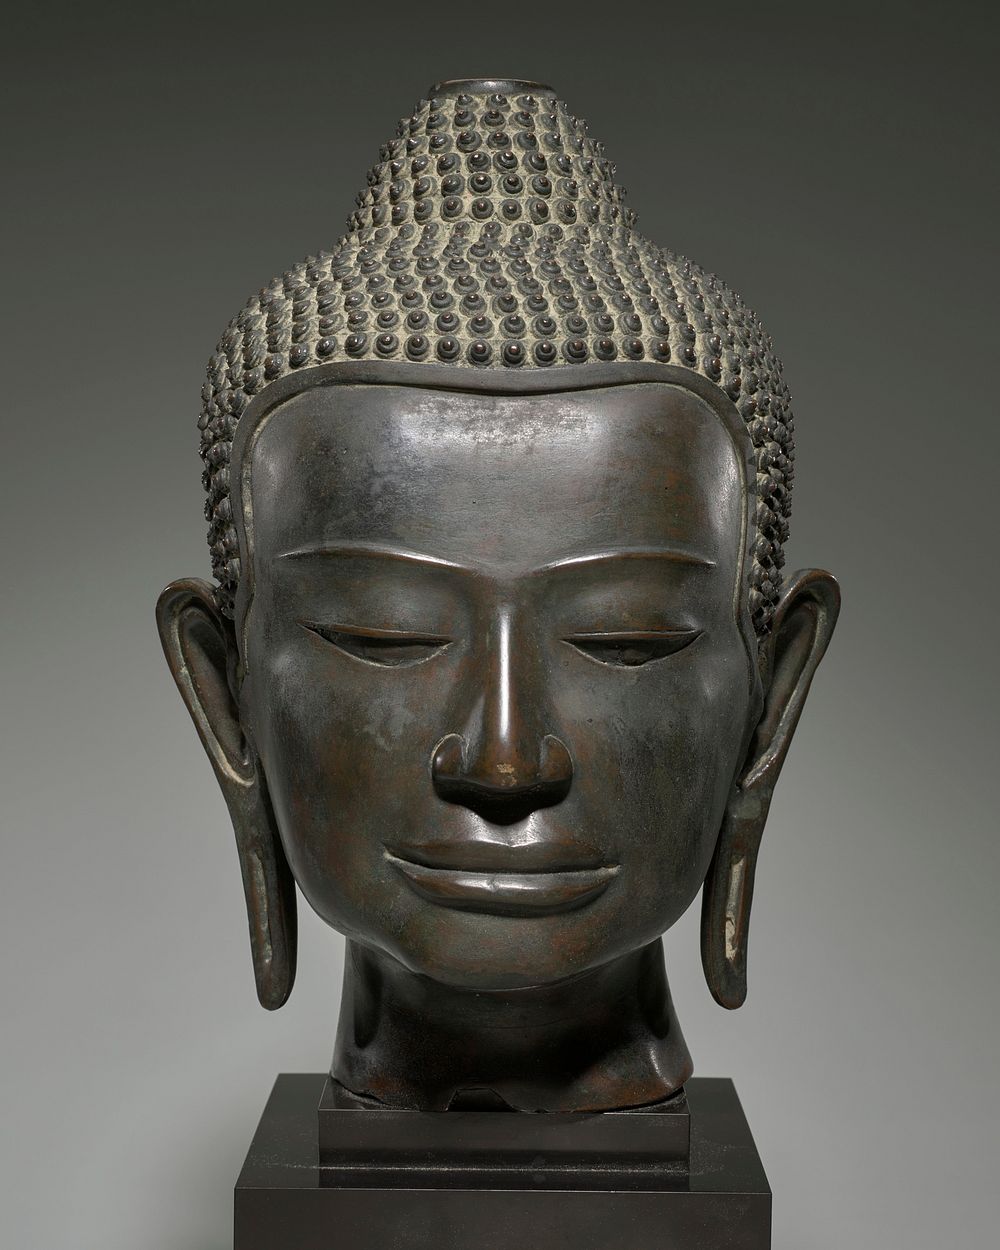 Buddha Head during 12th century sculpture in high resolution. Original from the Minneapolis Institute of Art. Digitally…